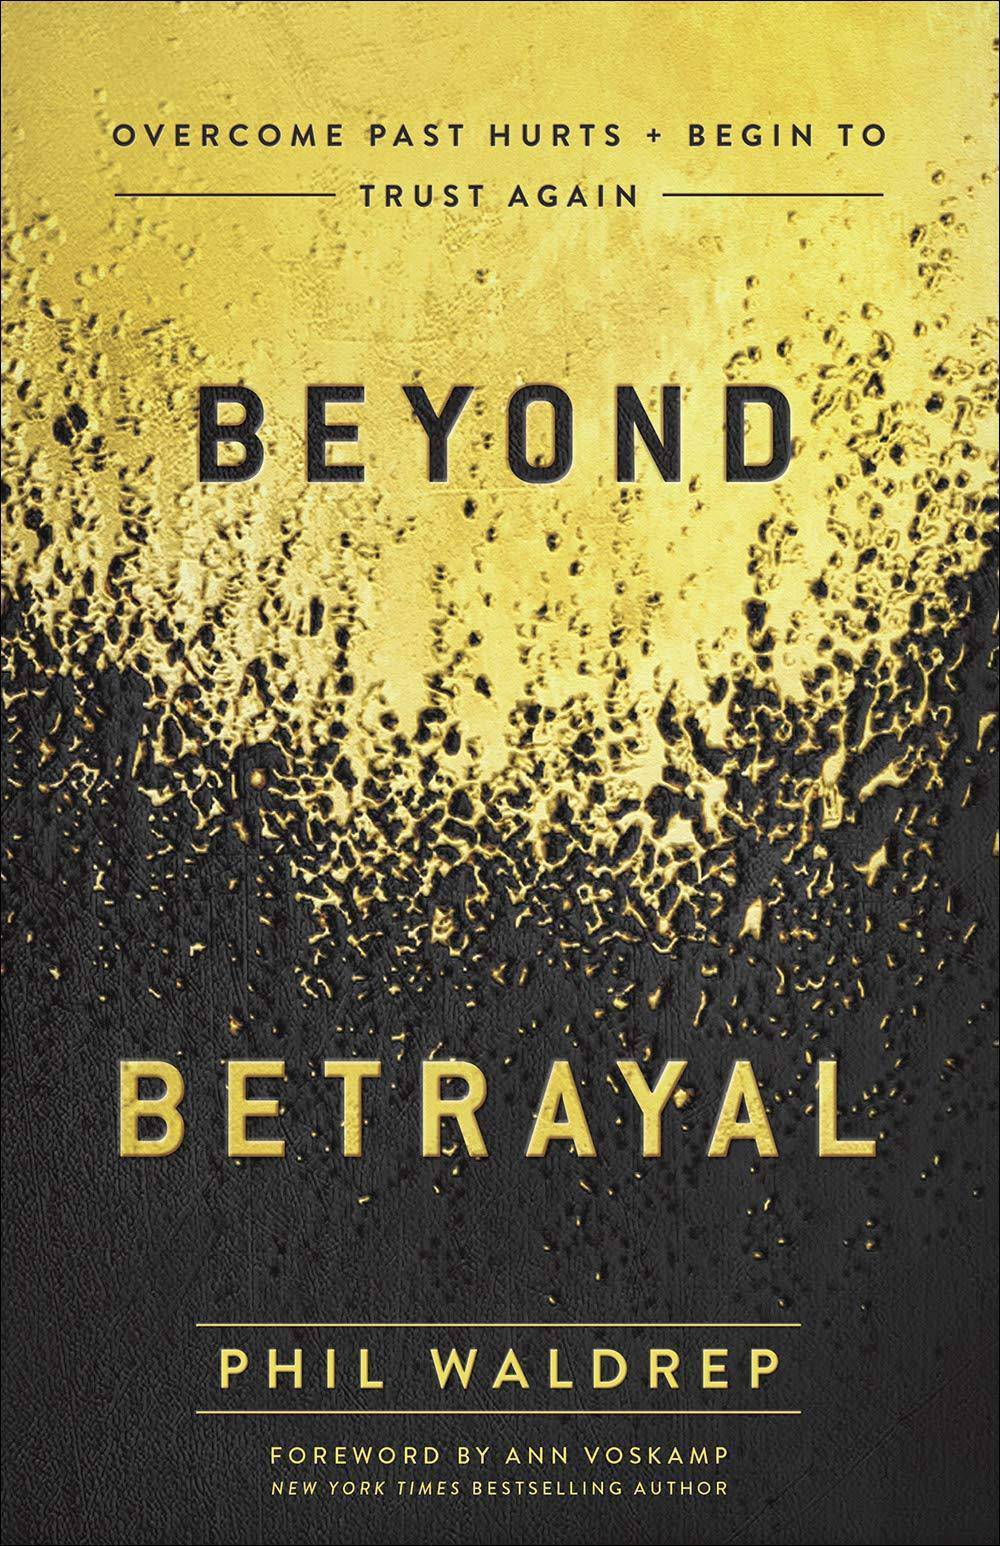 Beyond Betrayal: Overcome Past Hurts and Begin to Trust Again - SureShot Books Publishing LLC